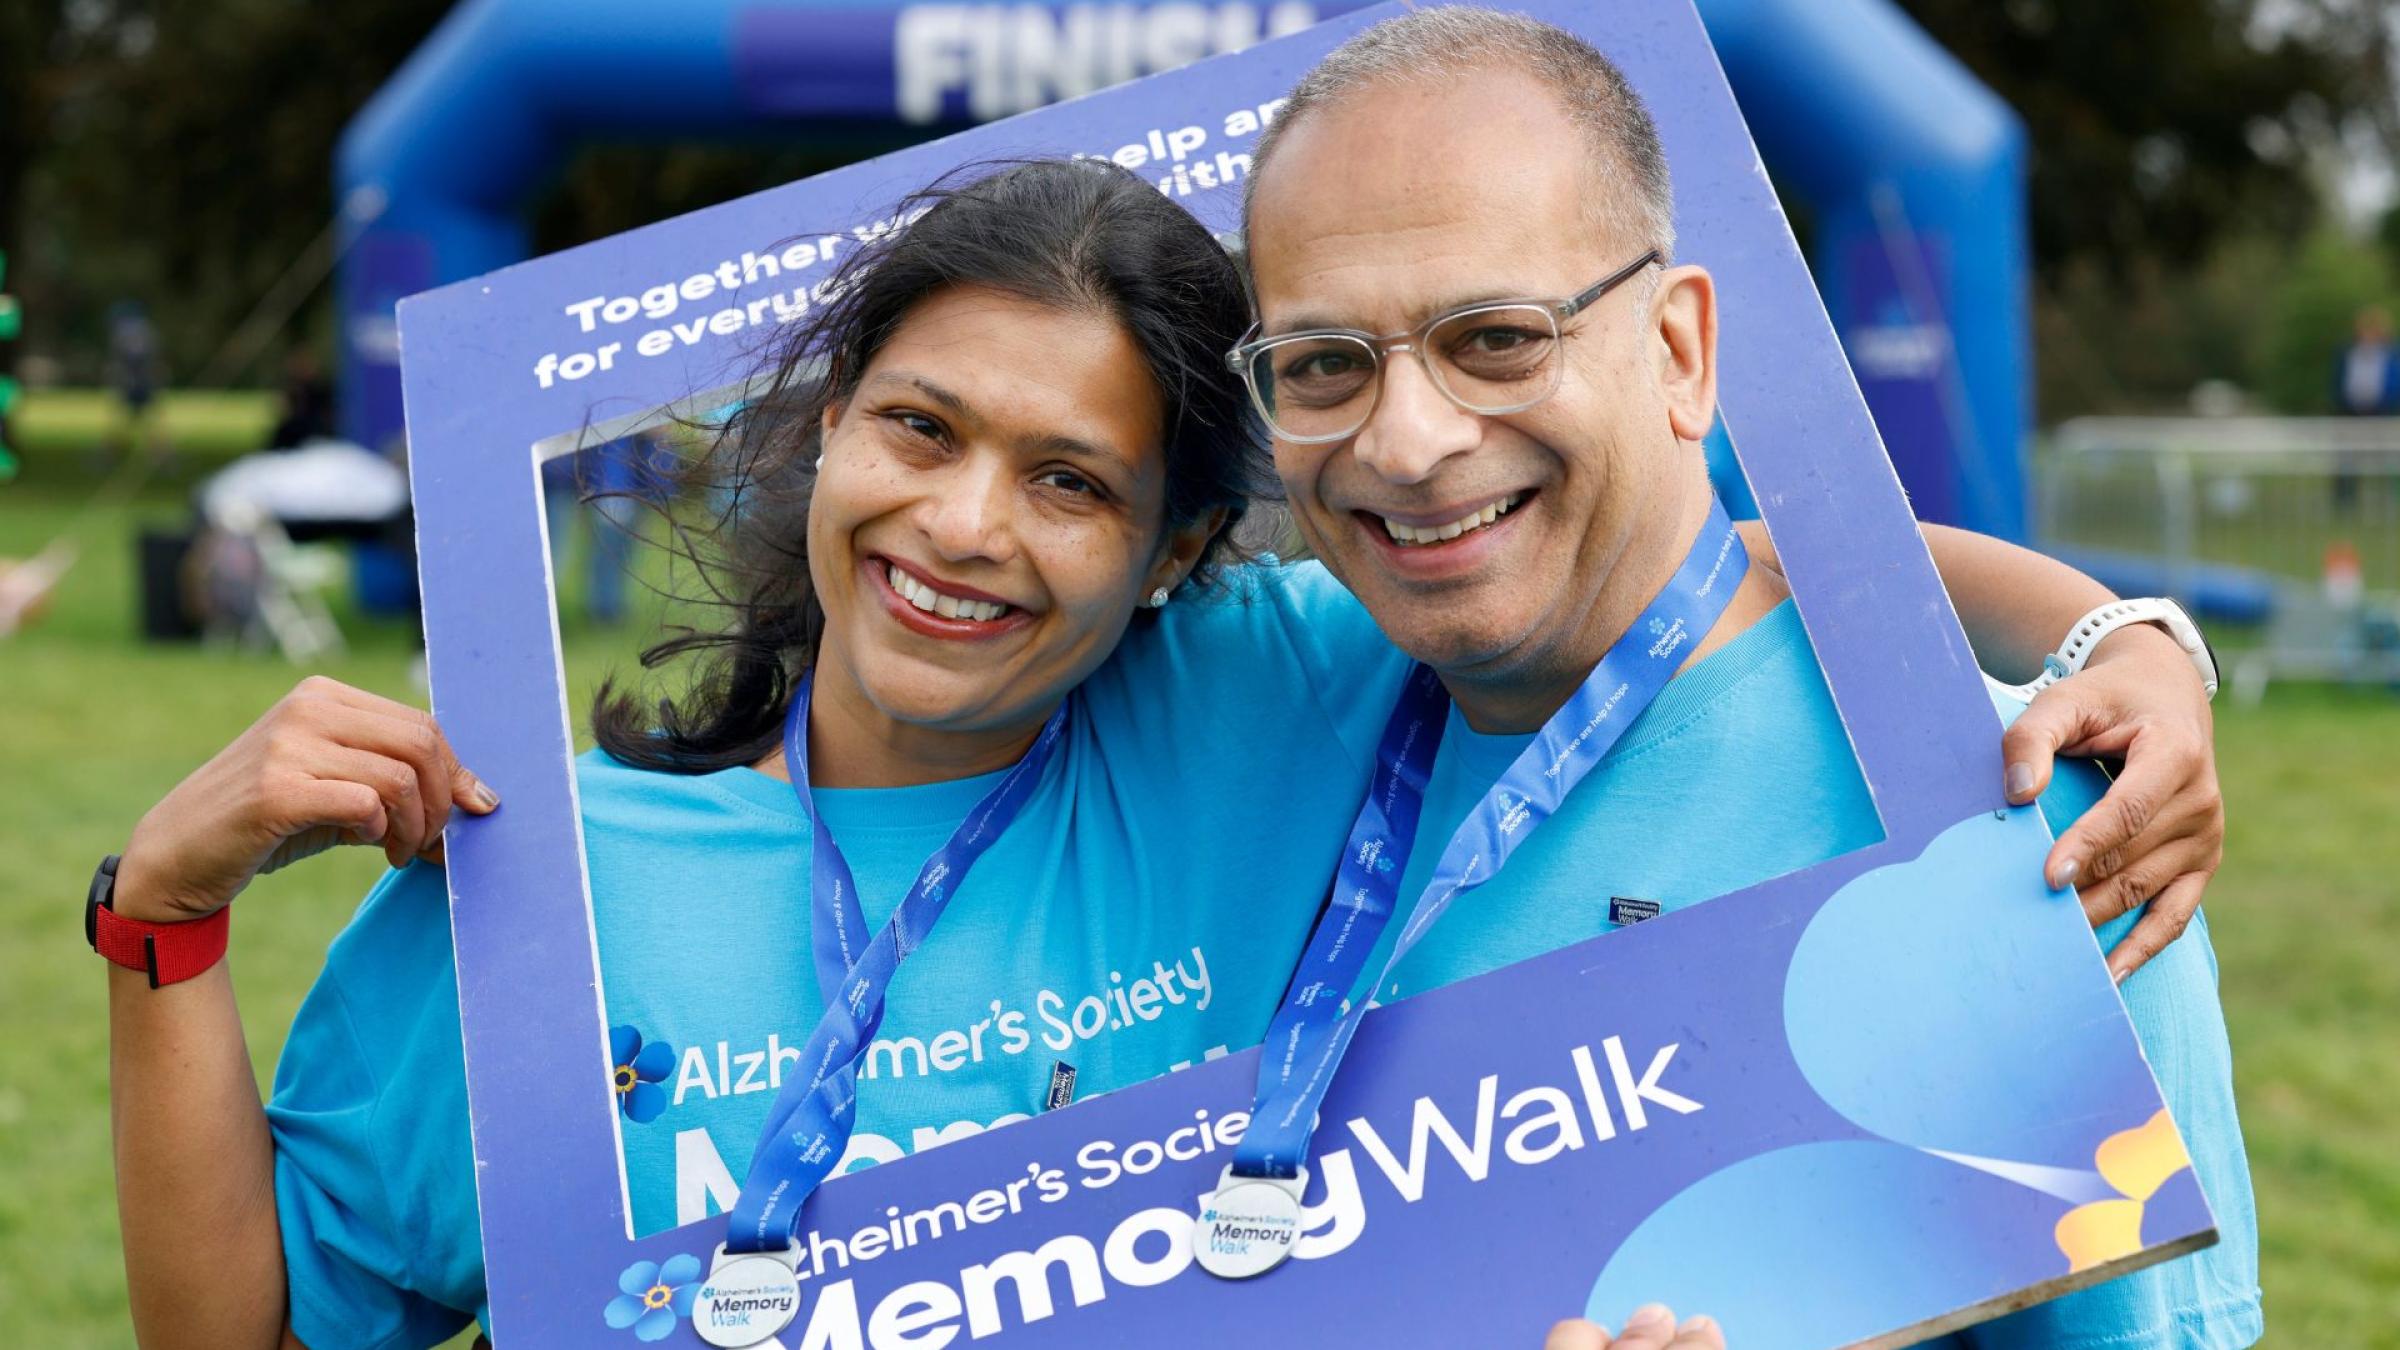 2 people smiling at the camera, wearing blue Memory Walk t-shirts and medals